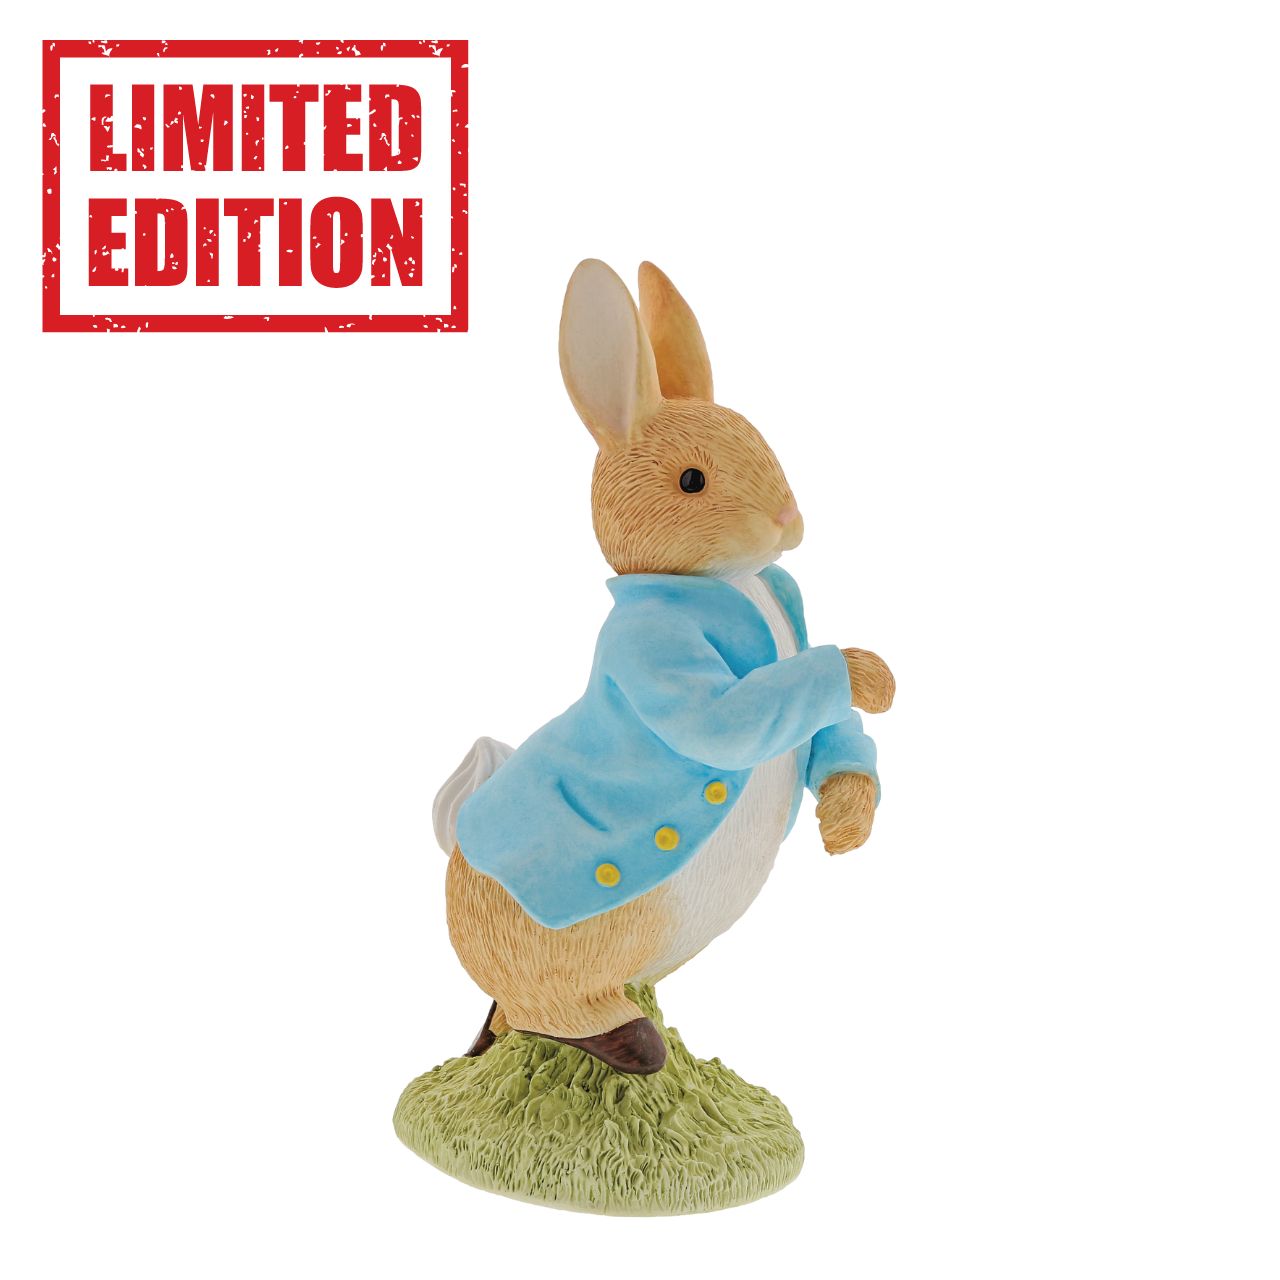 New release, the Peter Rabbit 120th Anniversary Figurine - Limited Edition. This special piece is limited to only 1,200 figurines and has been developed for the anniversary.